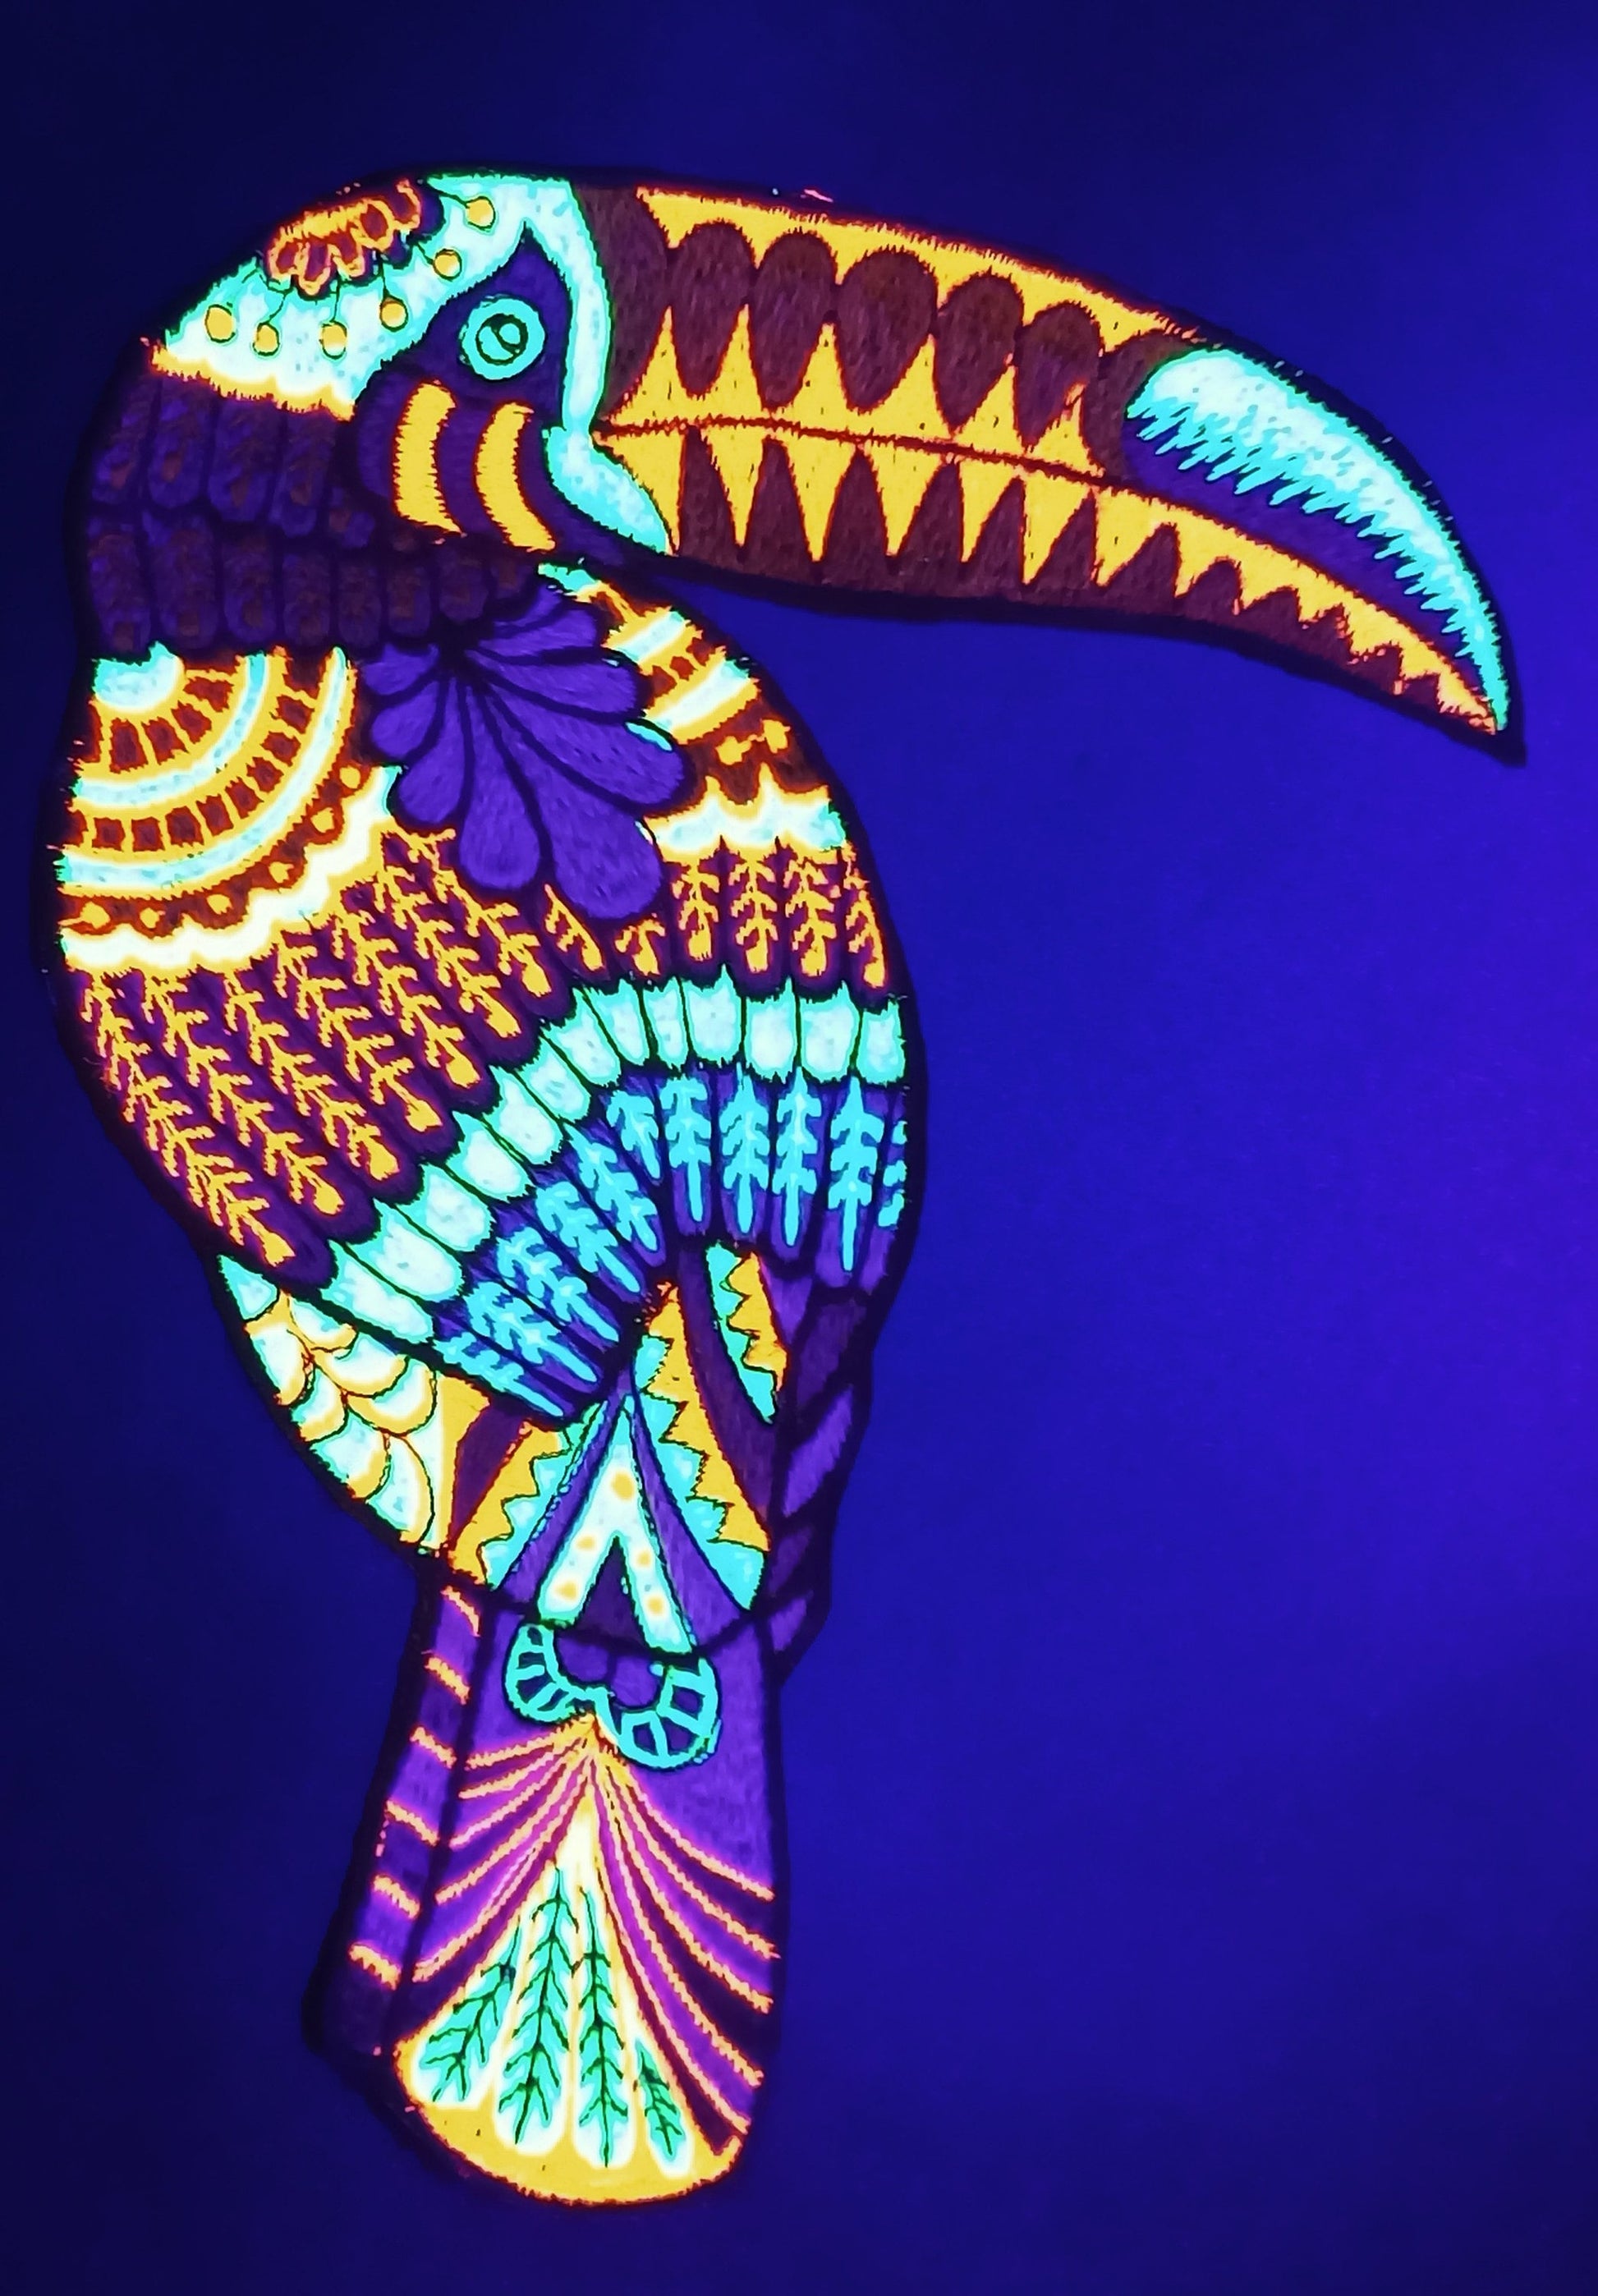 Psy Toucan UV Patch with blacklight glowing colors Animal Embroidery neon shining beautiful paradise bird artpiece offering beauty and love